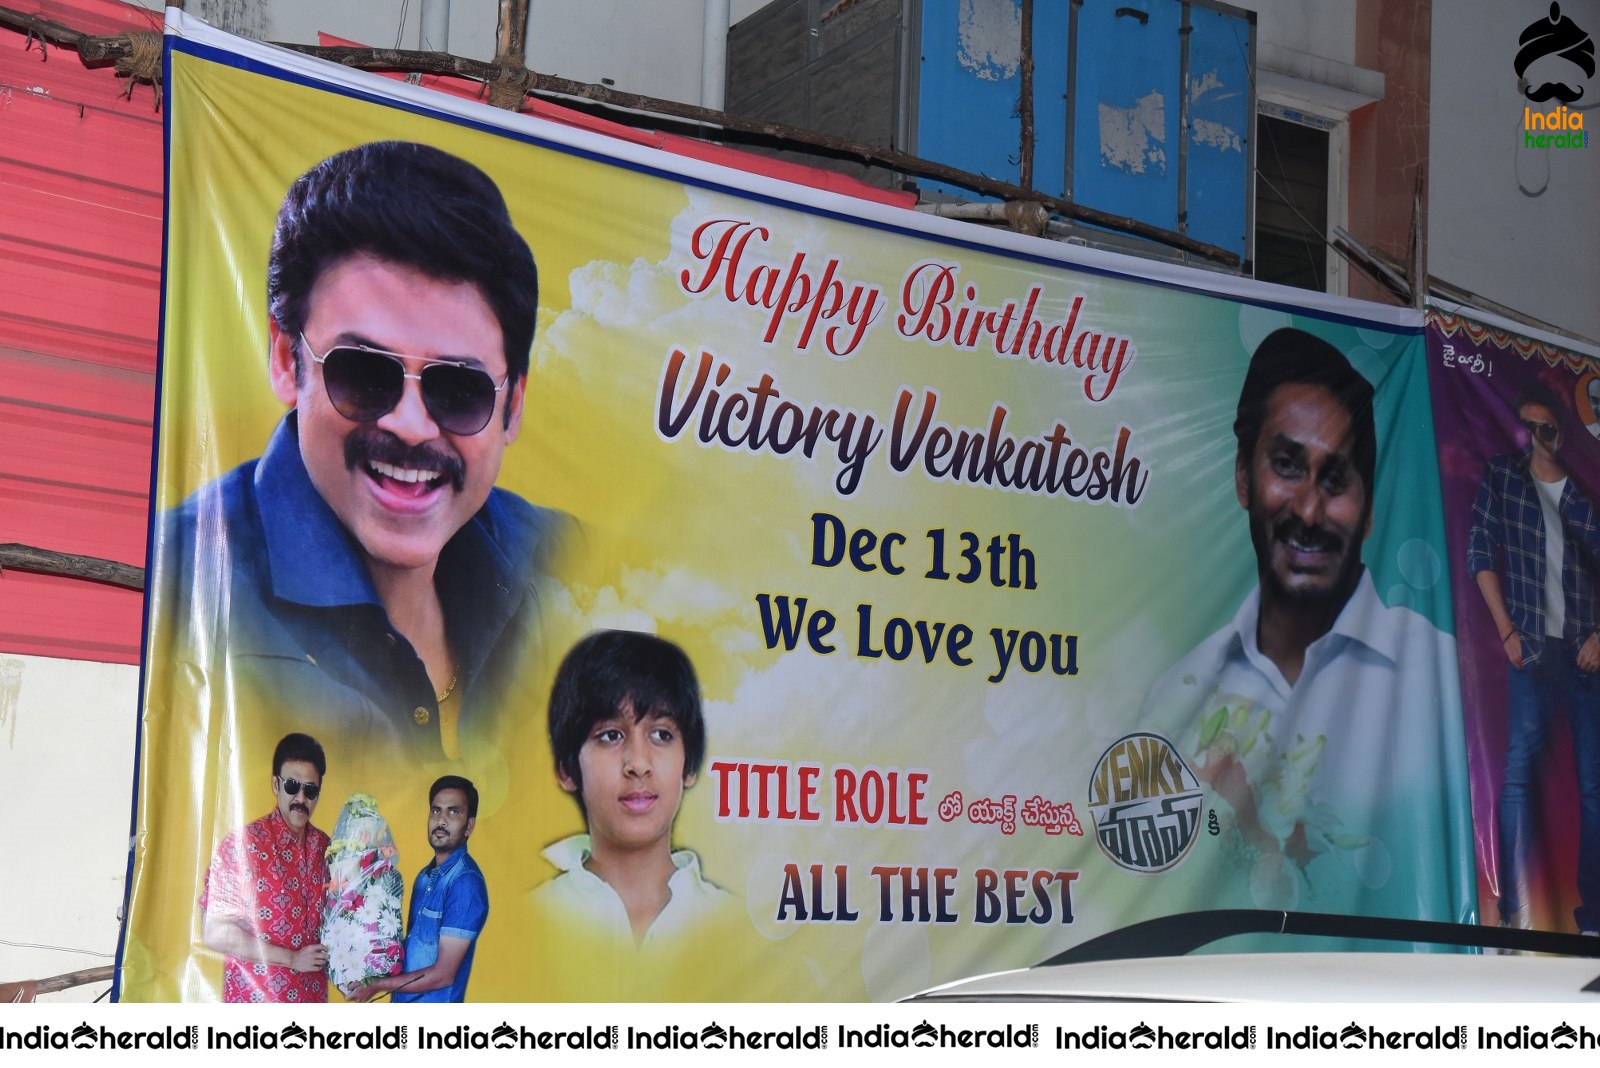 Huge Hoardings and Crackers Bursted for welcoming Venky Mama Team to Devi Theater Set 1